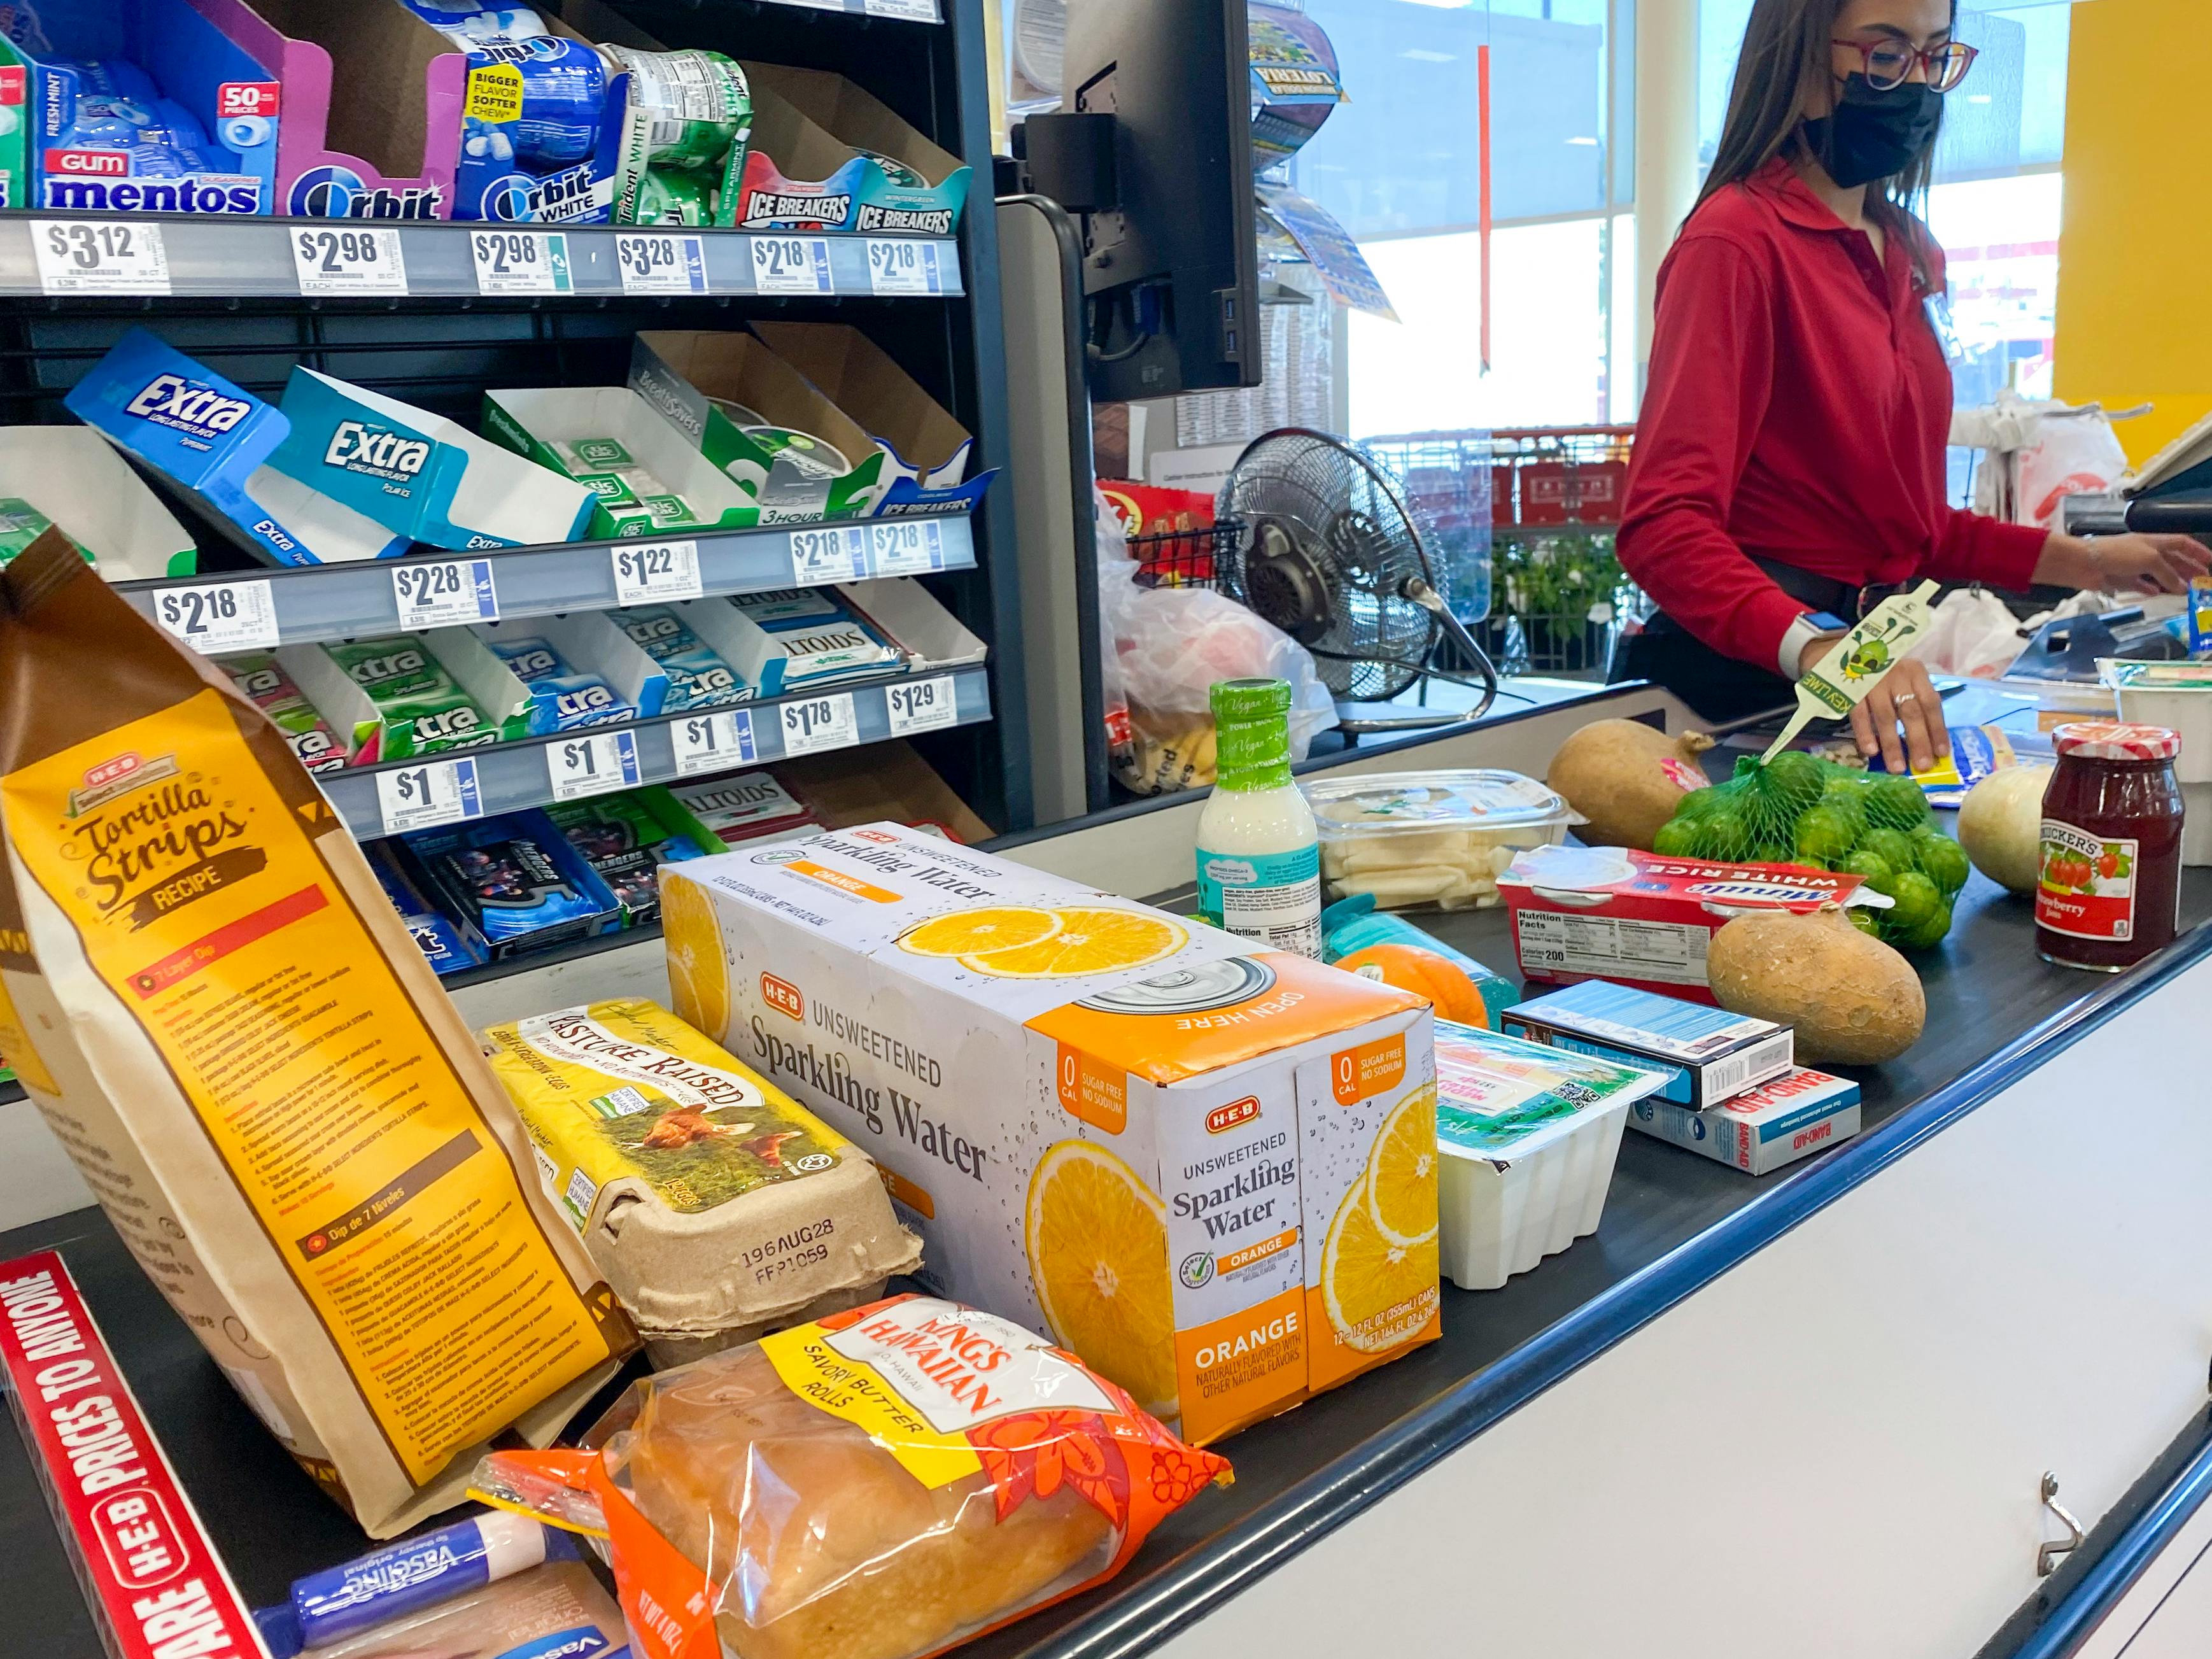 18 Cheapest Grocery Stores Near You: Shop Quality Food on a Budget -  MoneyPantry